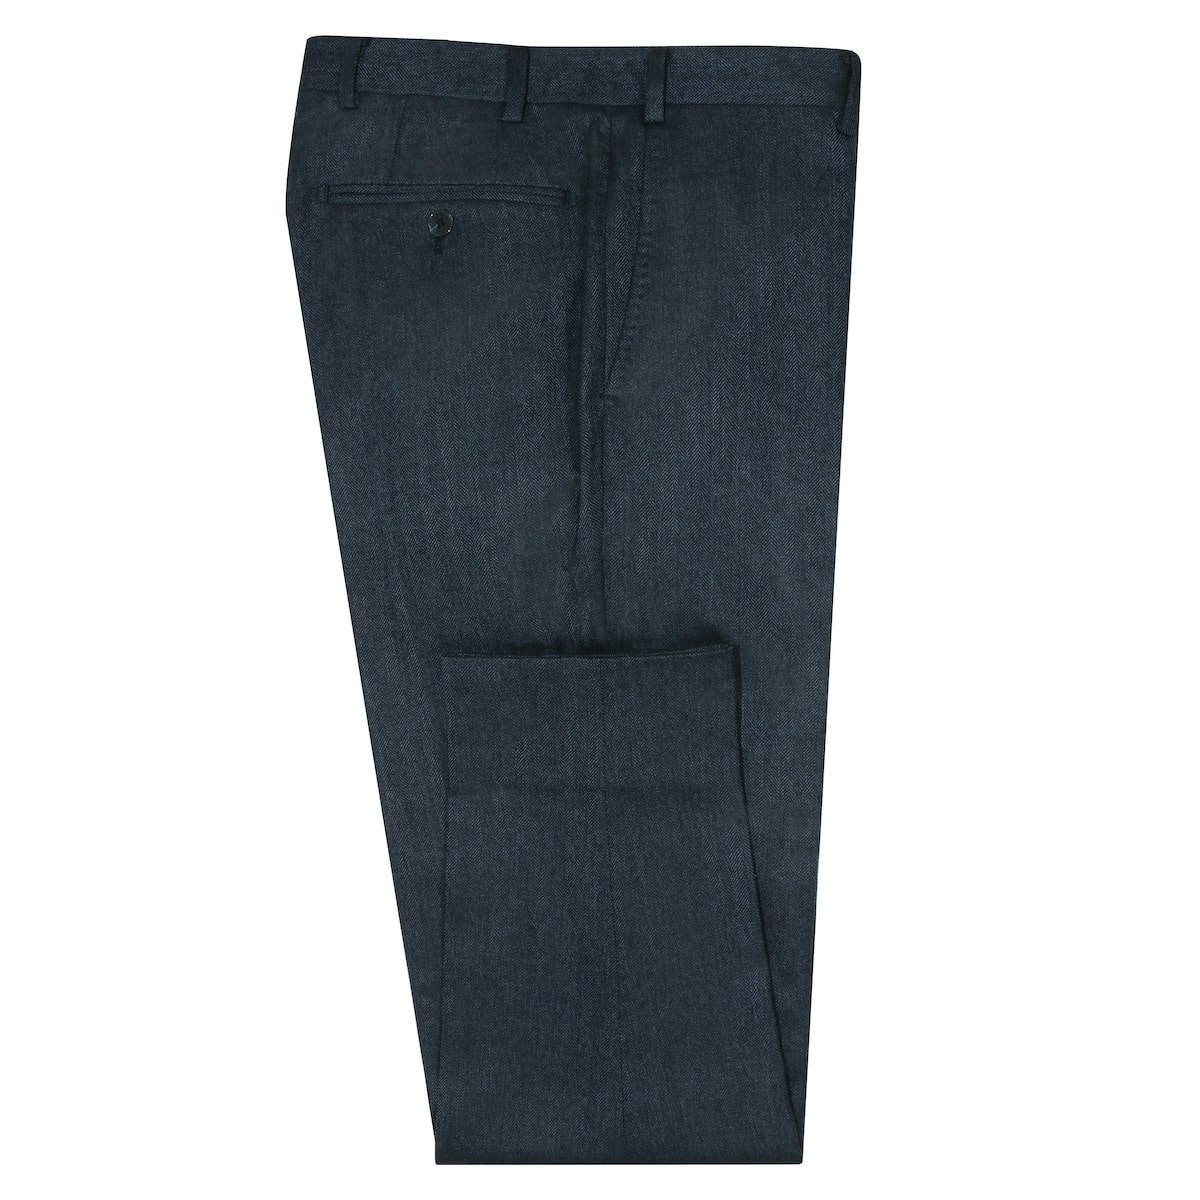 InStitchu Collection The Clift Pants